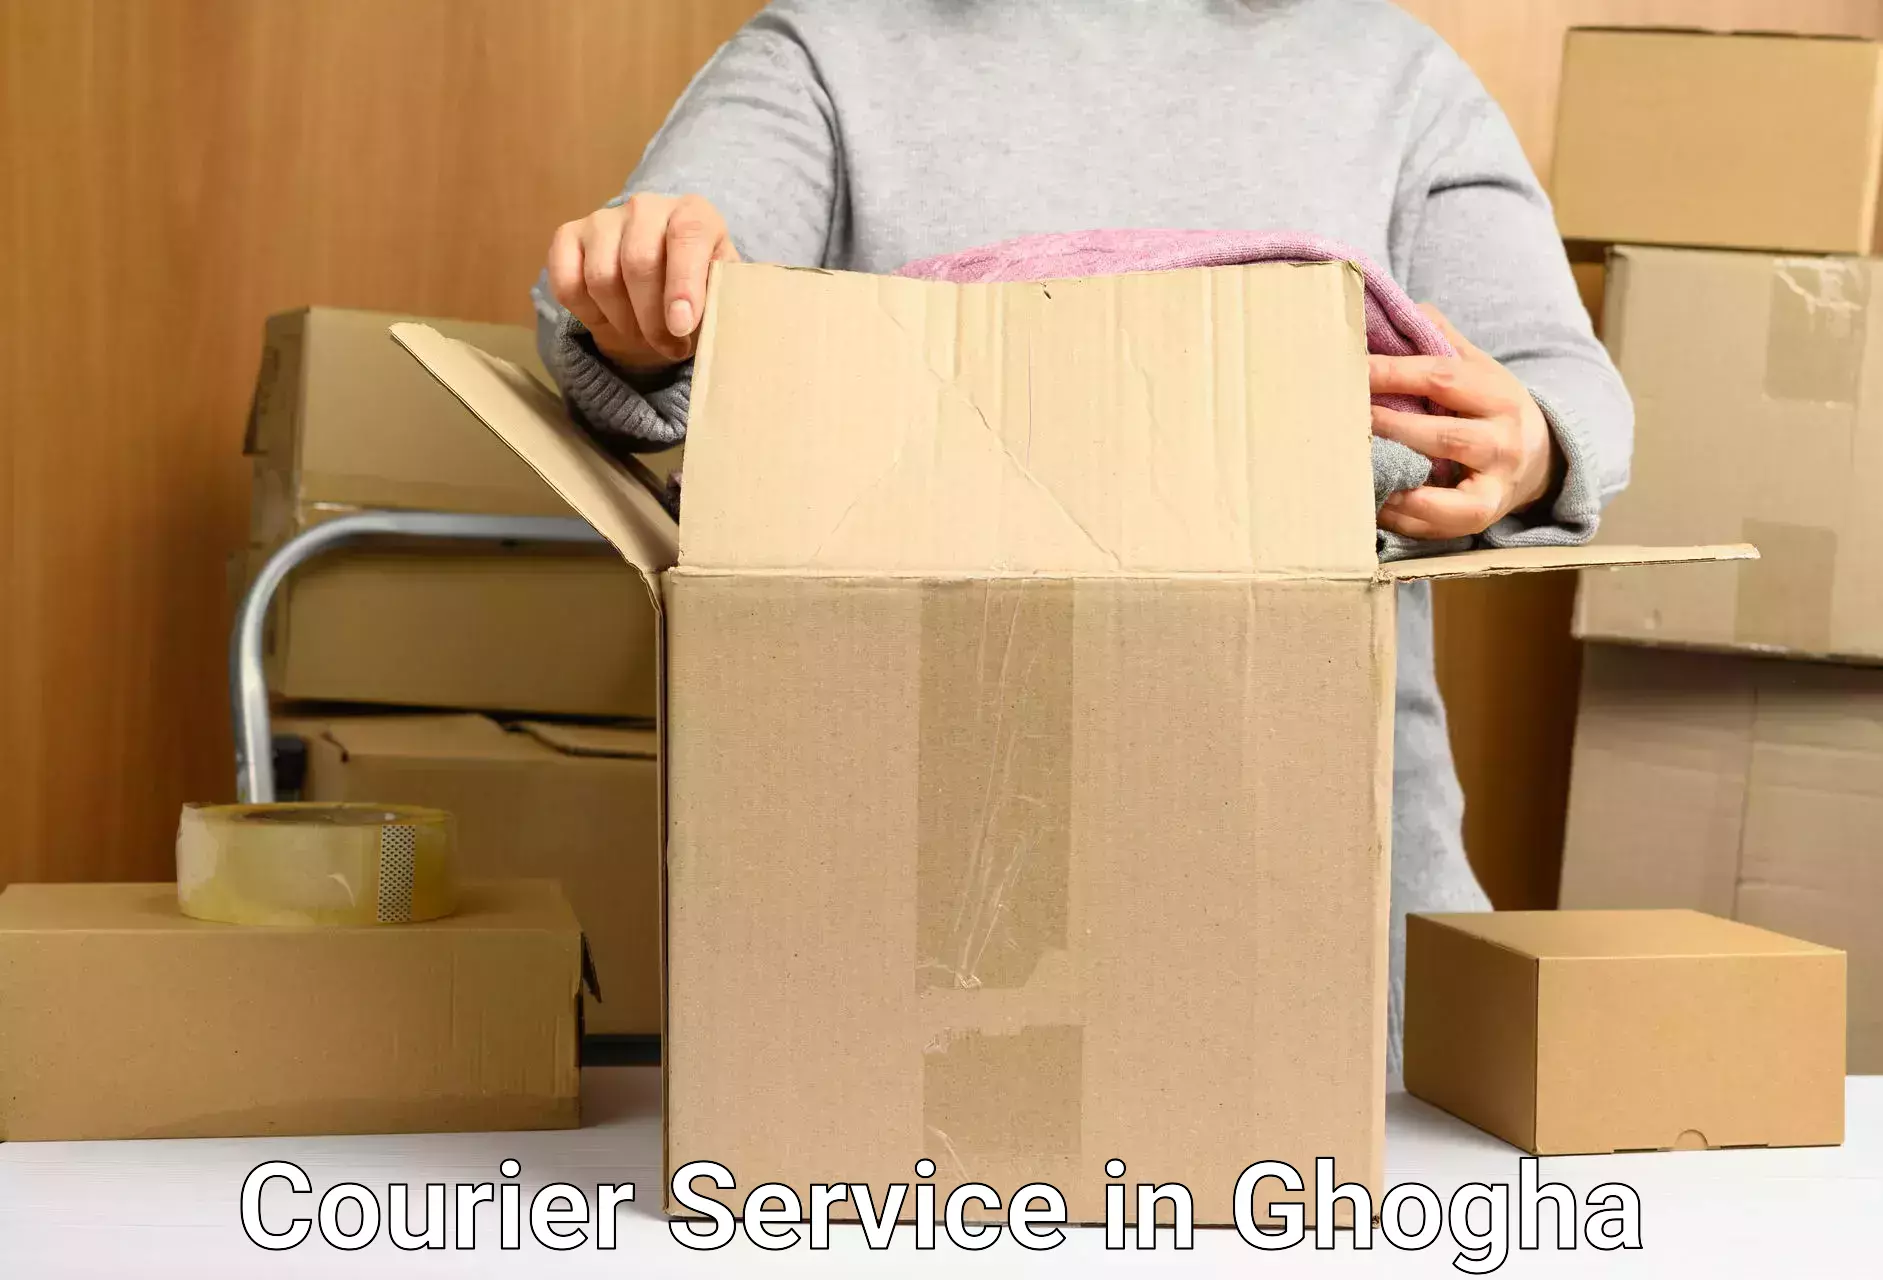 Customer-oriented courier services in Ghogha